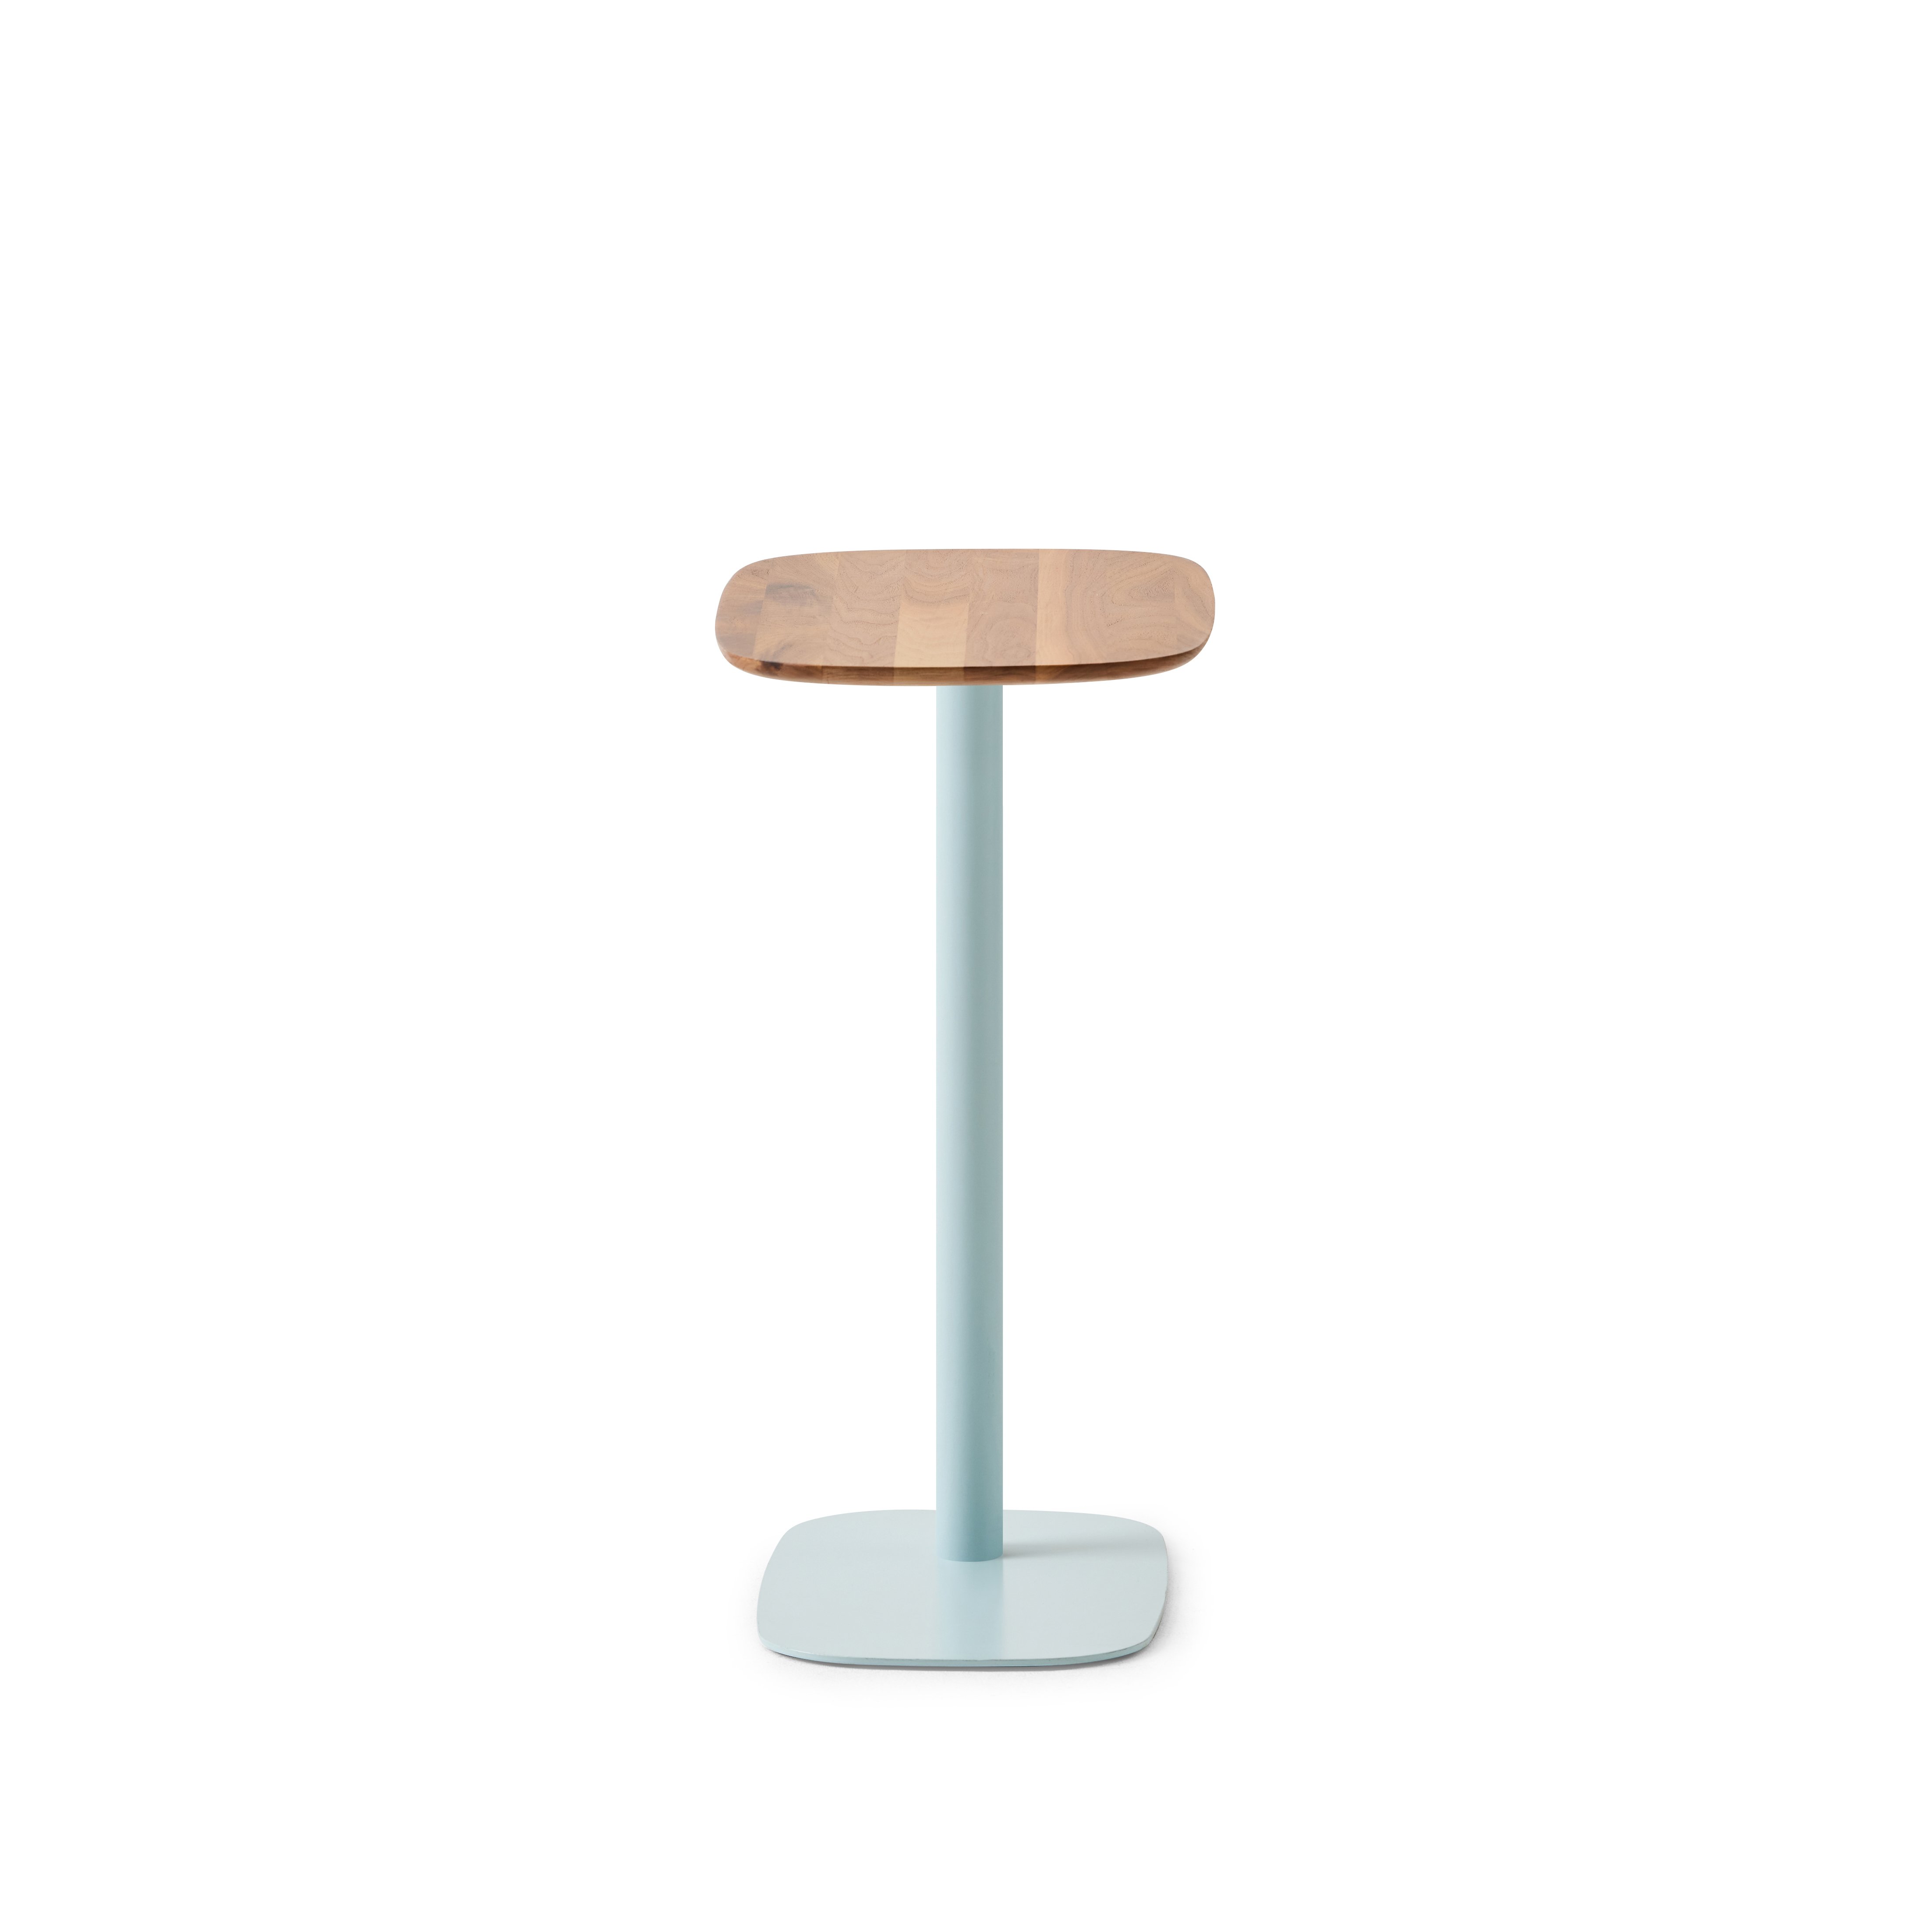 Detail front shot of Pip Table with Wood top and Baby Blue base